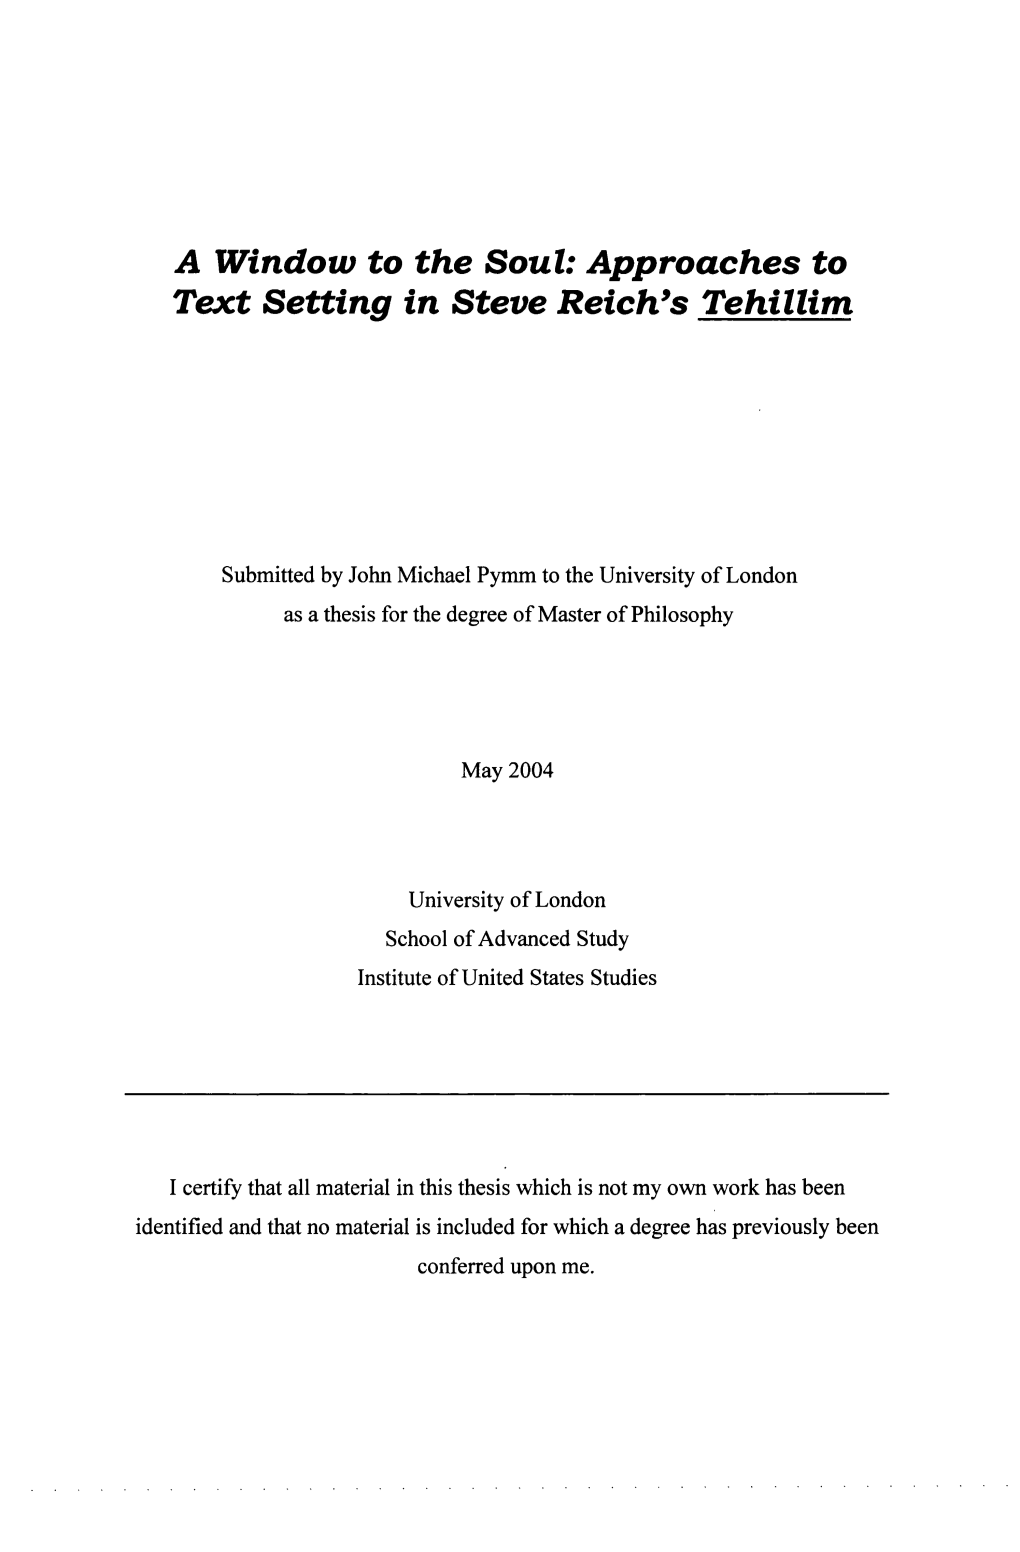 A Window to the Soul: Approaches to Text Setting in Steve Reich's Tehillim